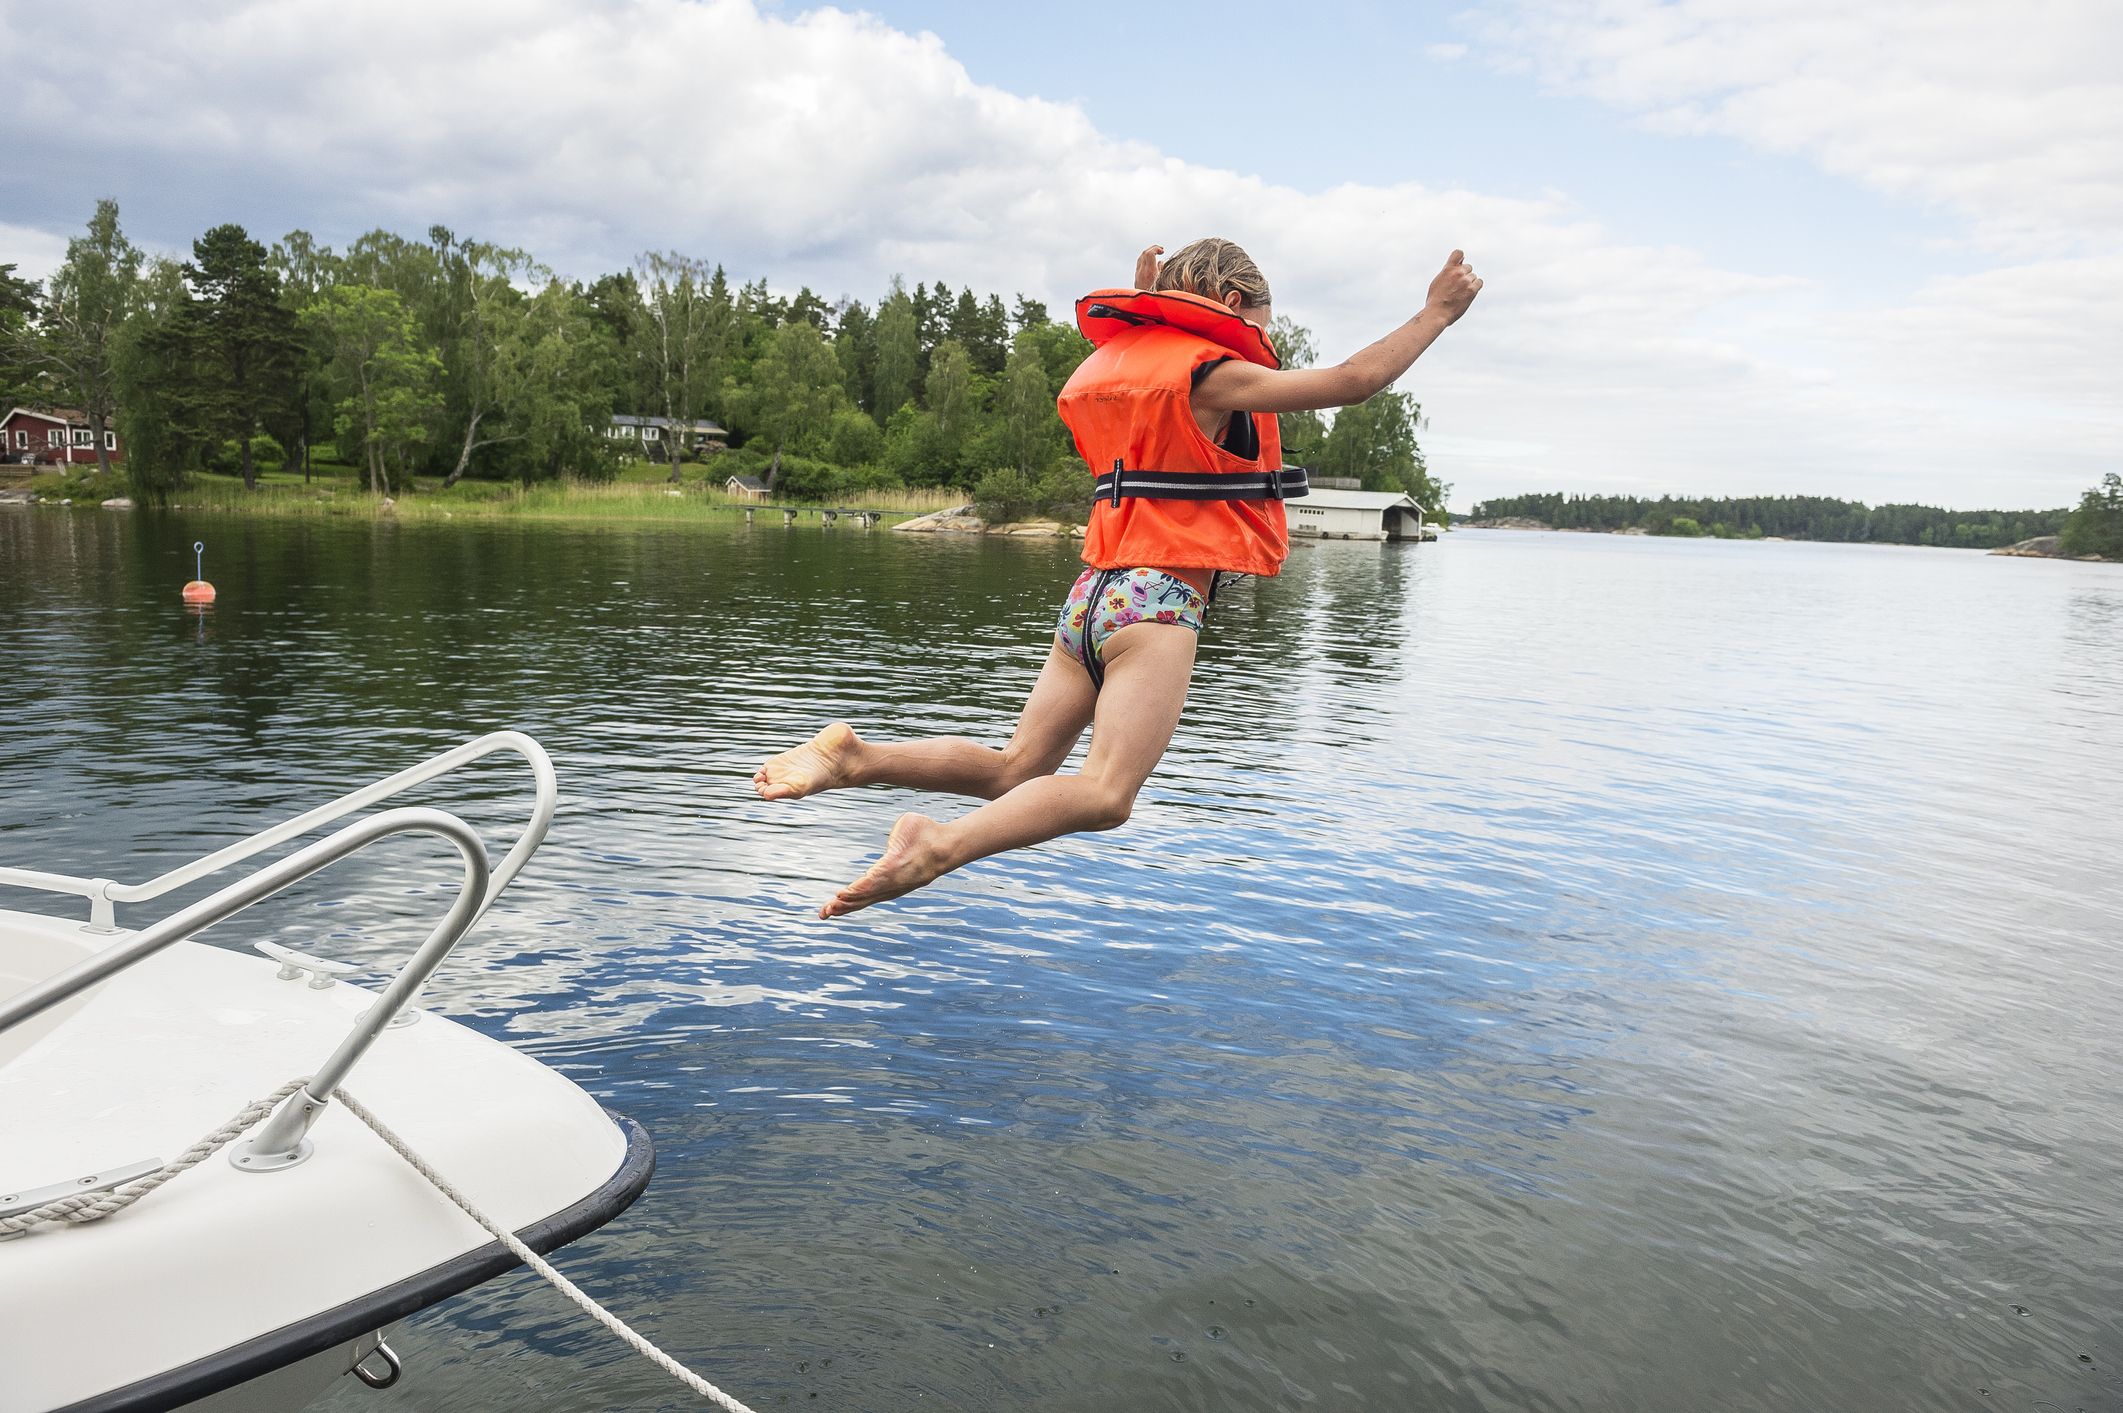 The 8 Best Kids' Life Jackets of 2023 - Kids' Life Jacket Review